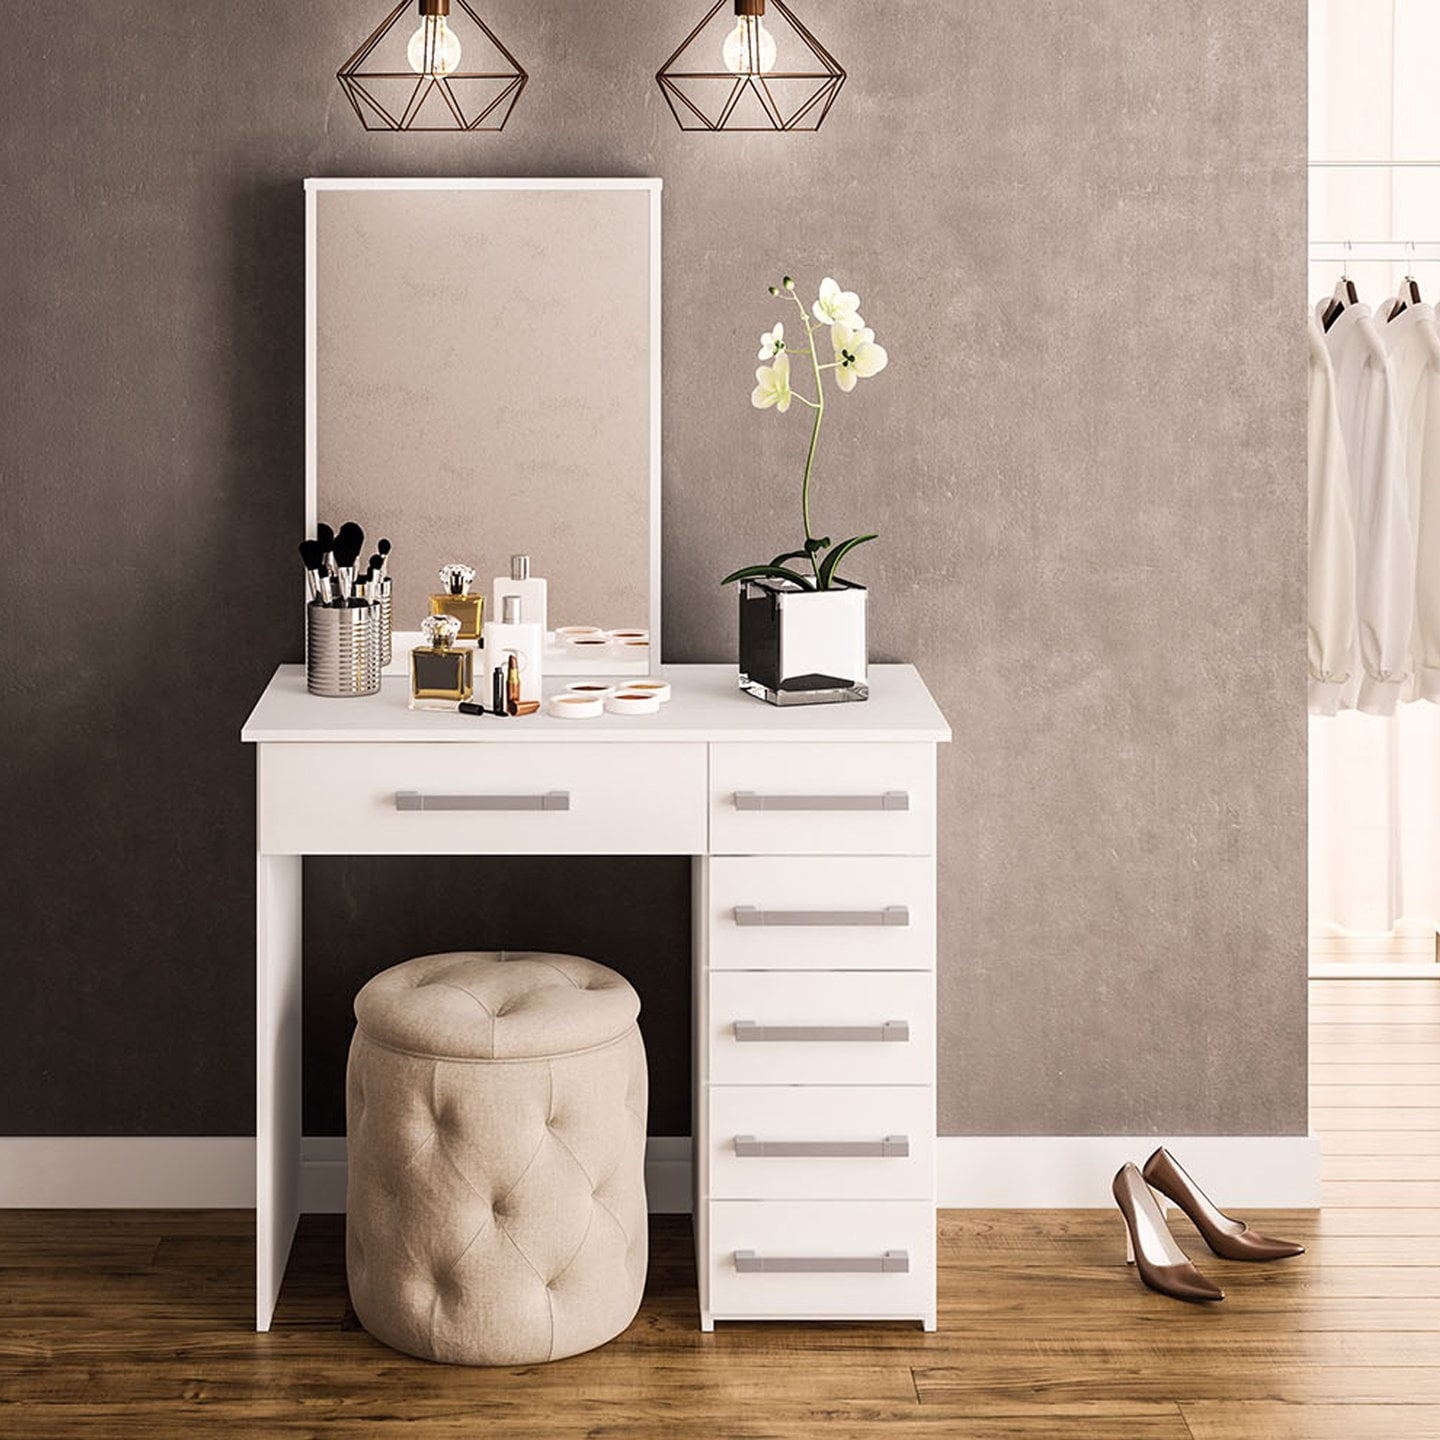 Boahaus Sofia Modern Vanity Table With, Vanity Table For Teenager